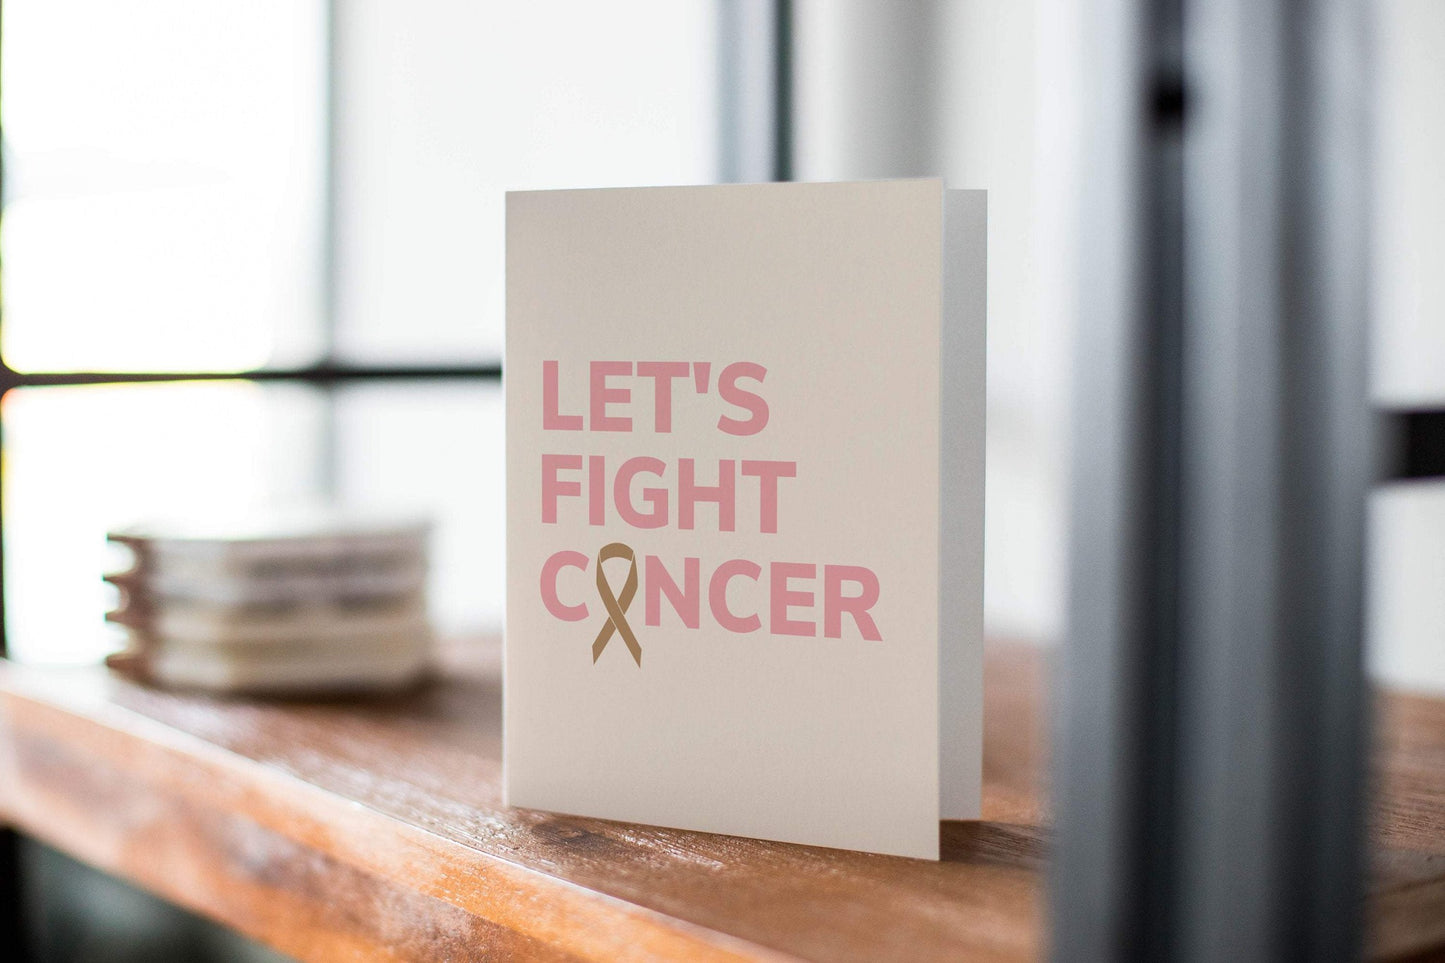 Let's Fight Cancer - Cancer Awareness Greeting Card -Thinking Of You - Encouragement Card.